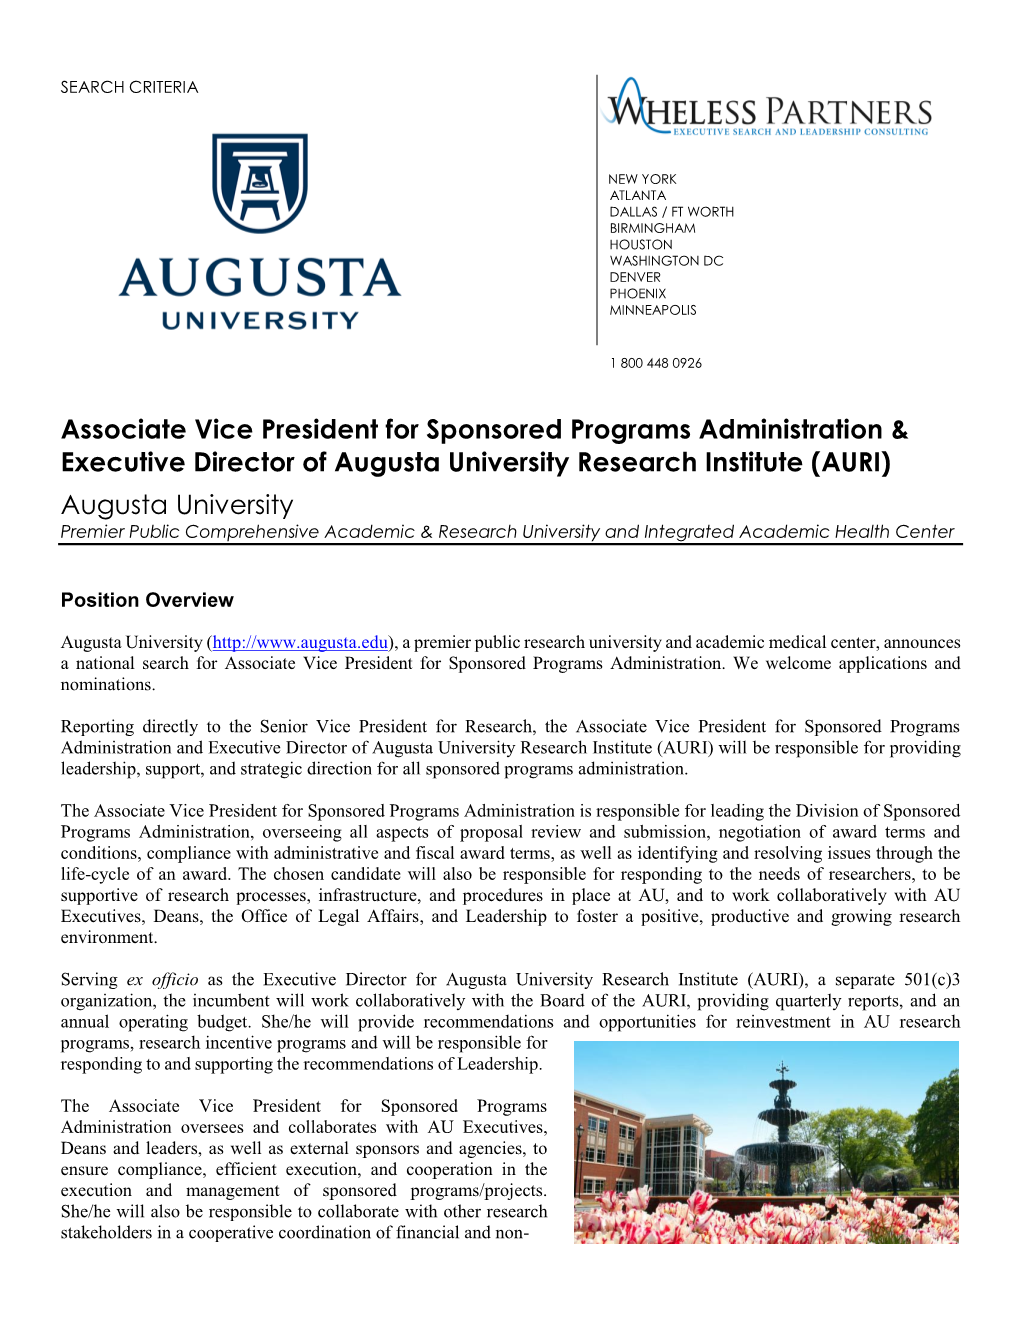 Associate Vice President for Sponsored Programs Administration & Executive Director of Augusta University Research Institute